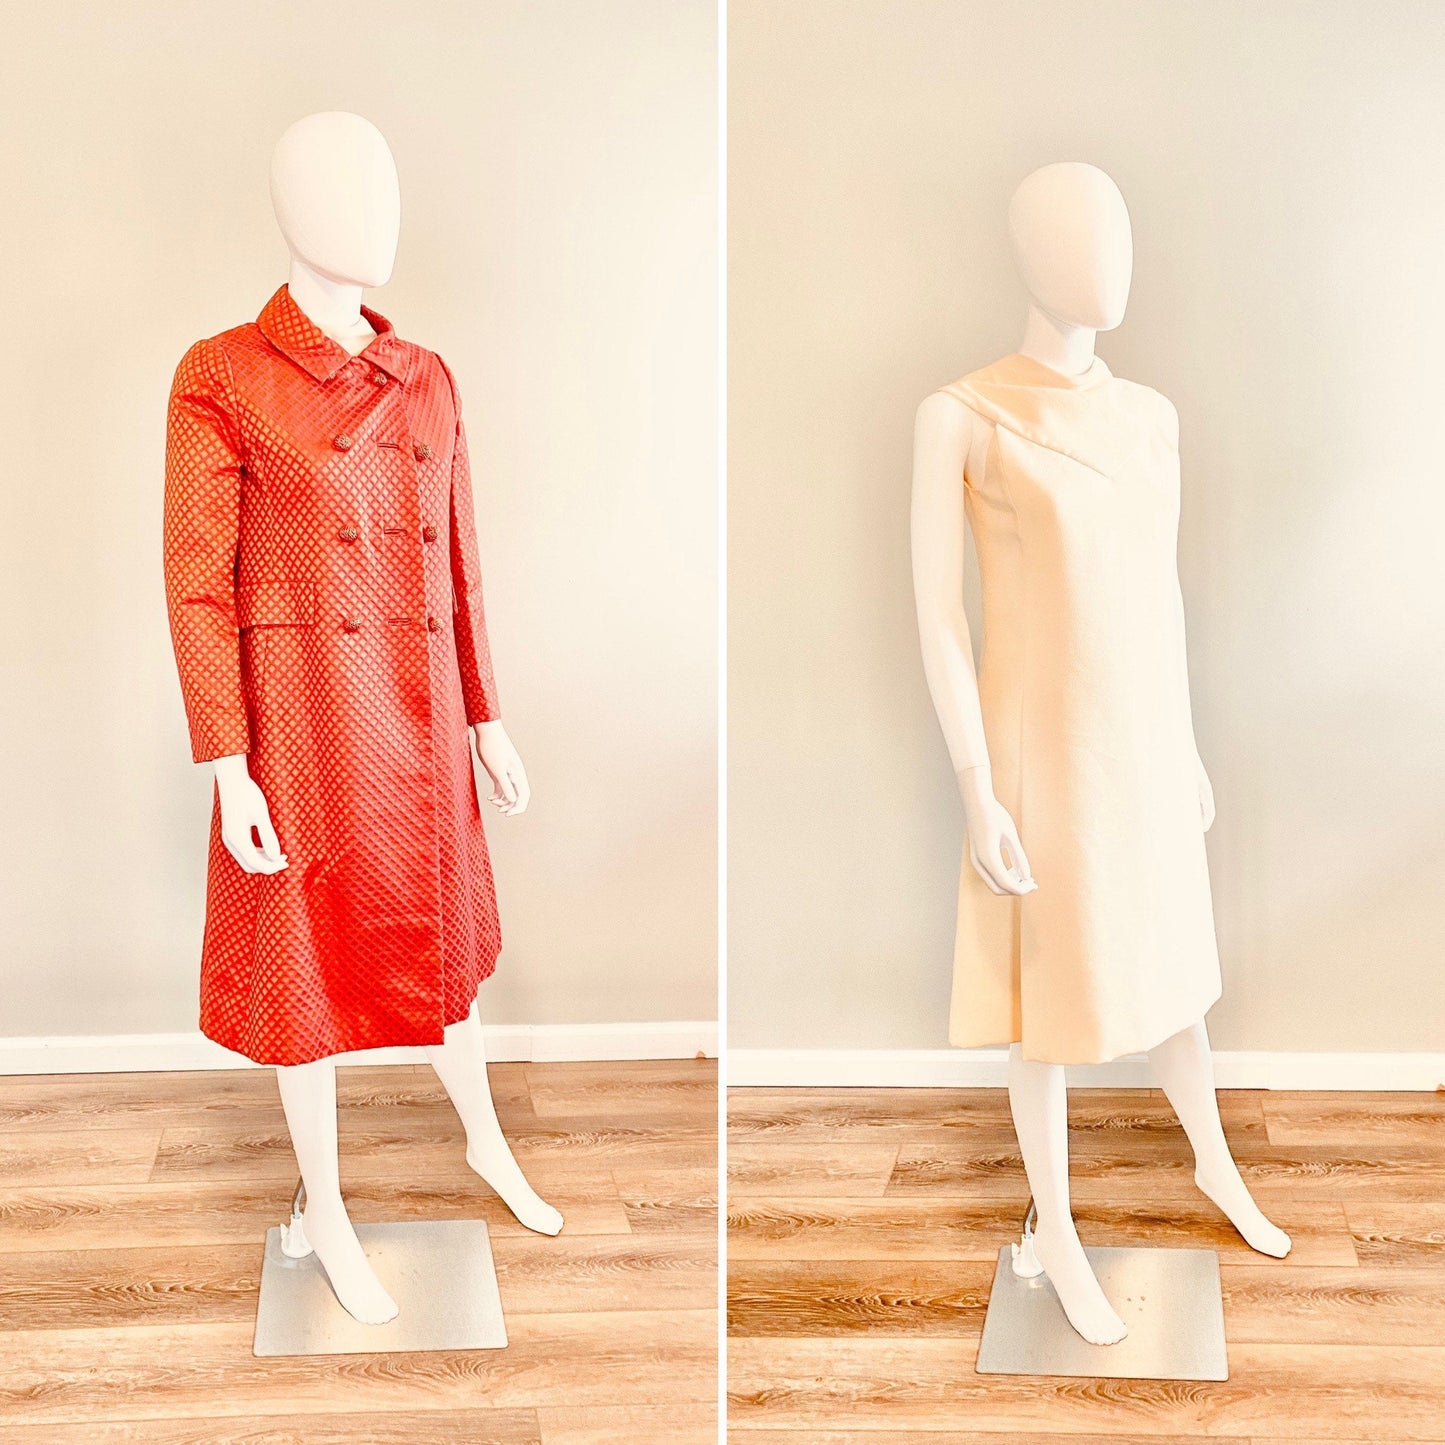 Vintage 1960s Malcom Starr Red Coat and Shift Dress Set / 60s red peacoat Size XS S